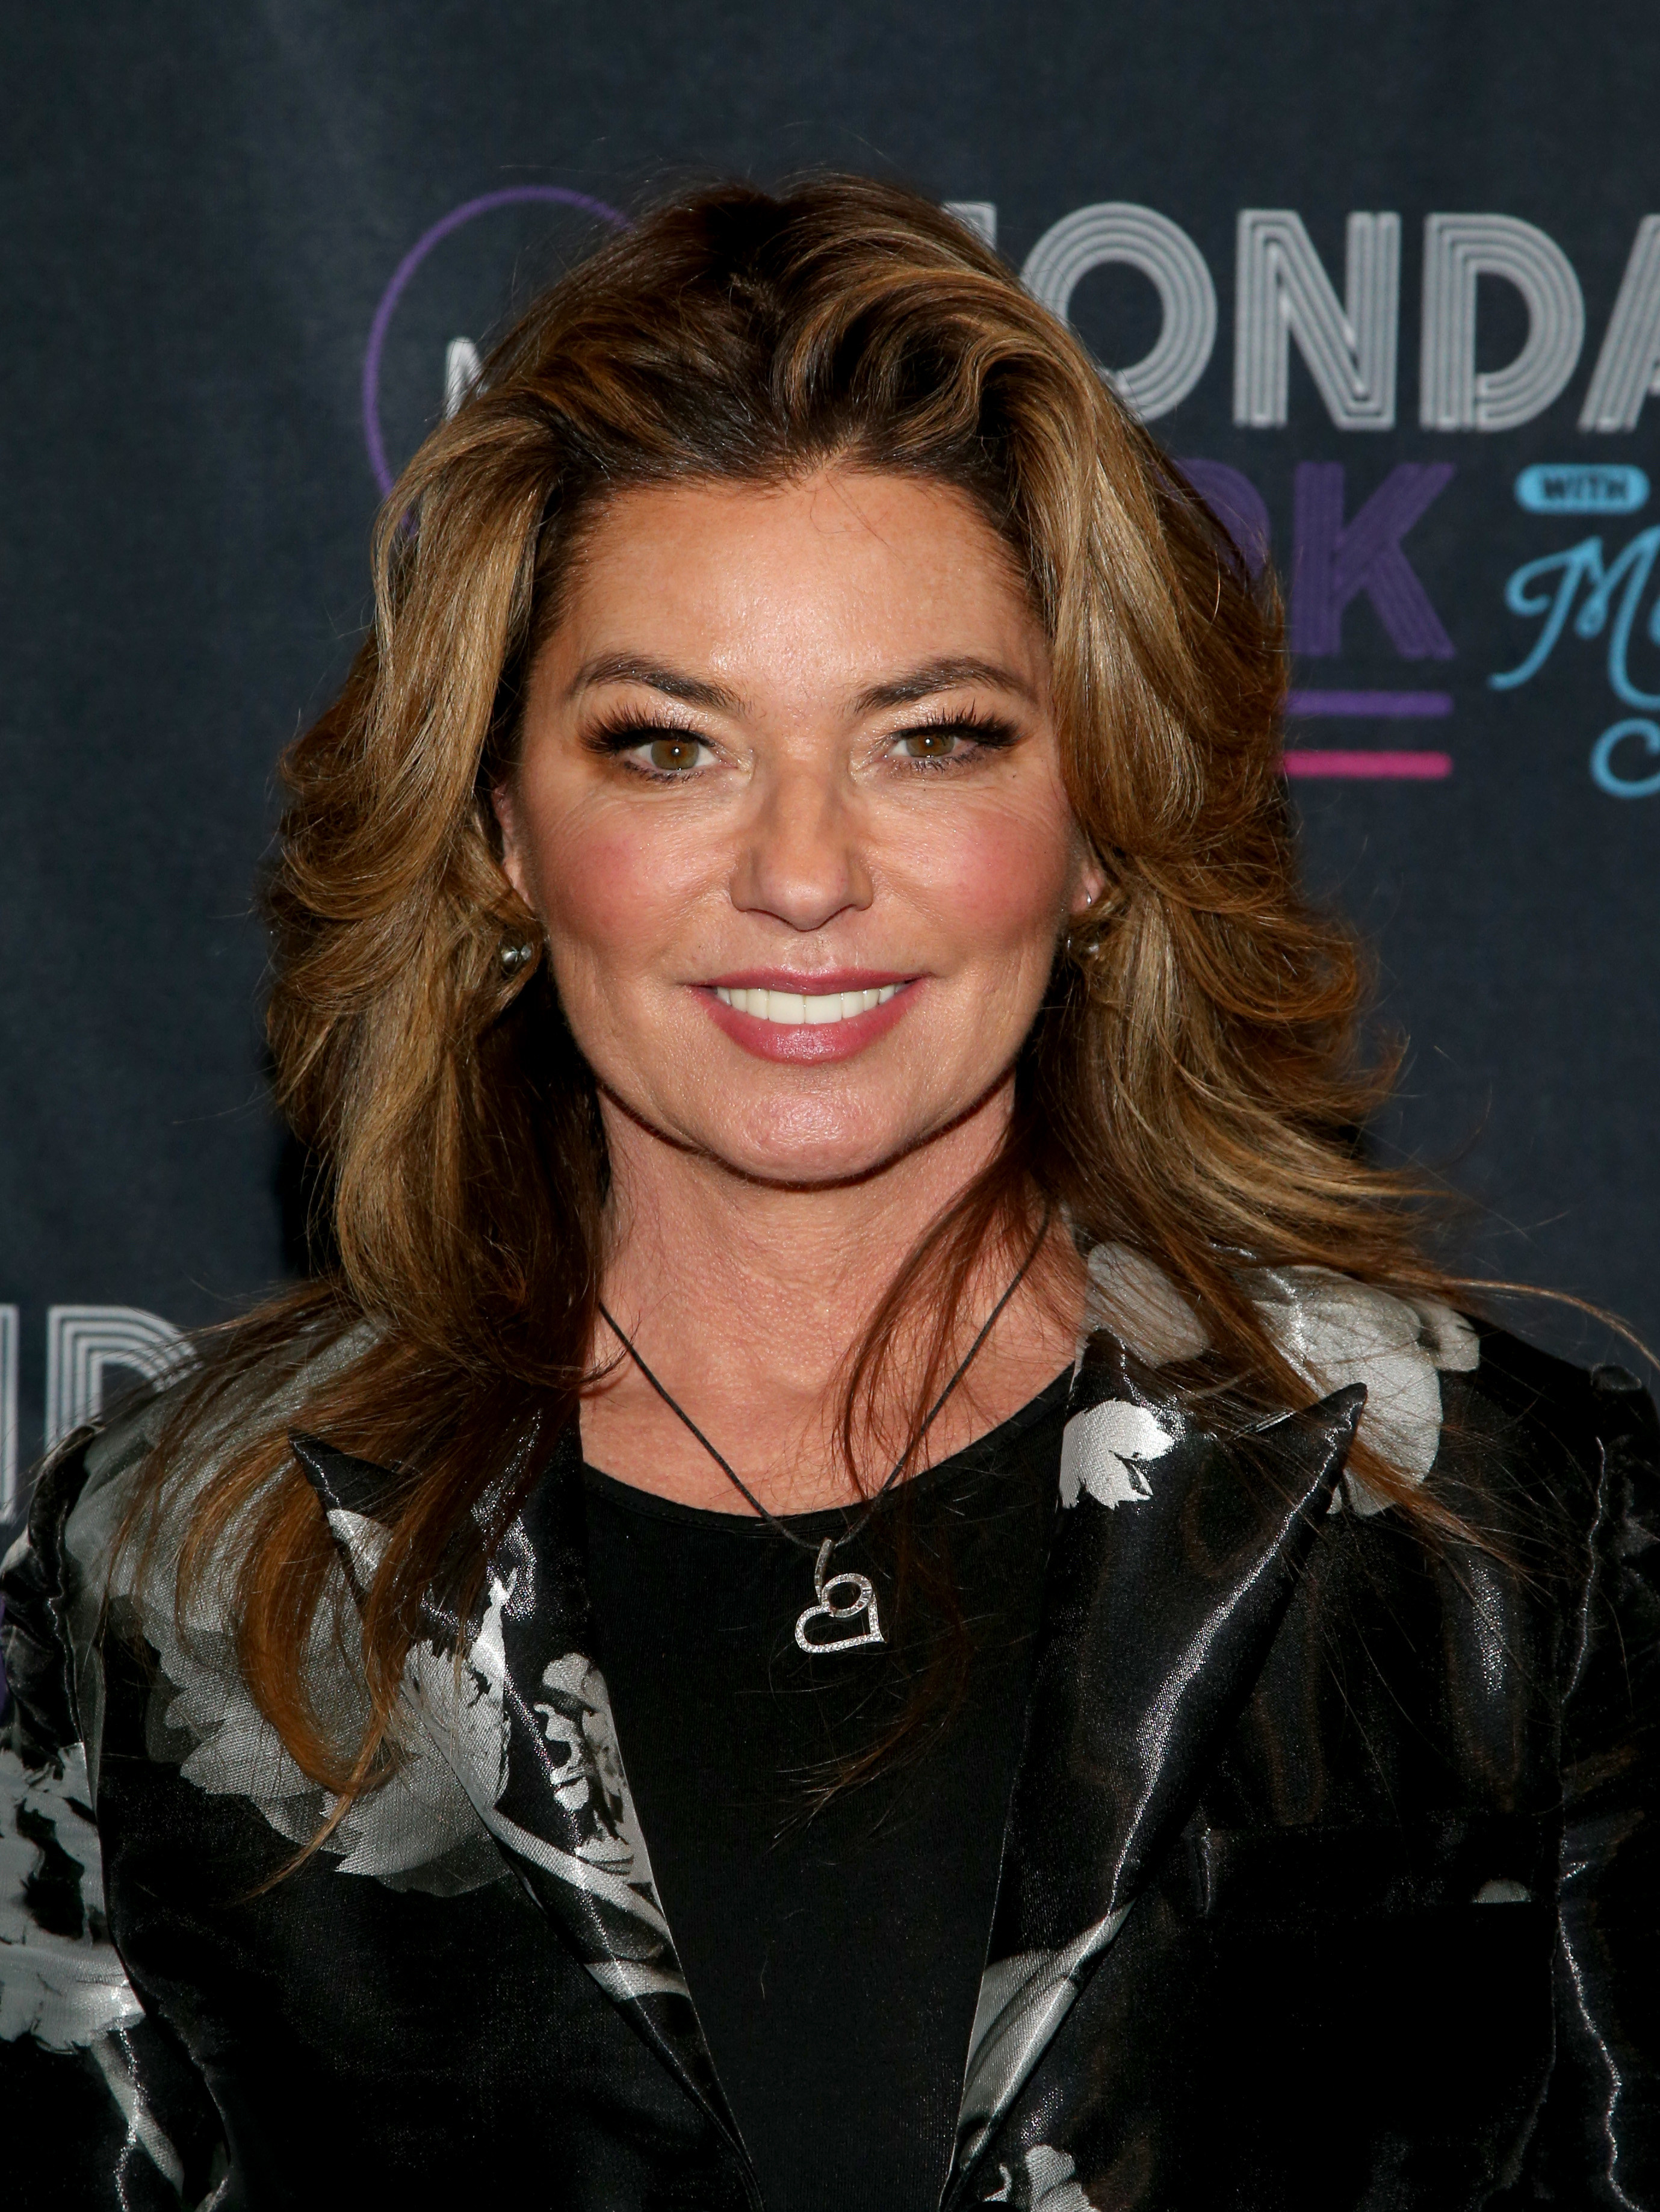 Shania wearing a dark floral suit at an event